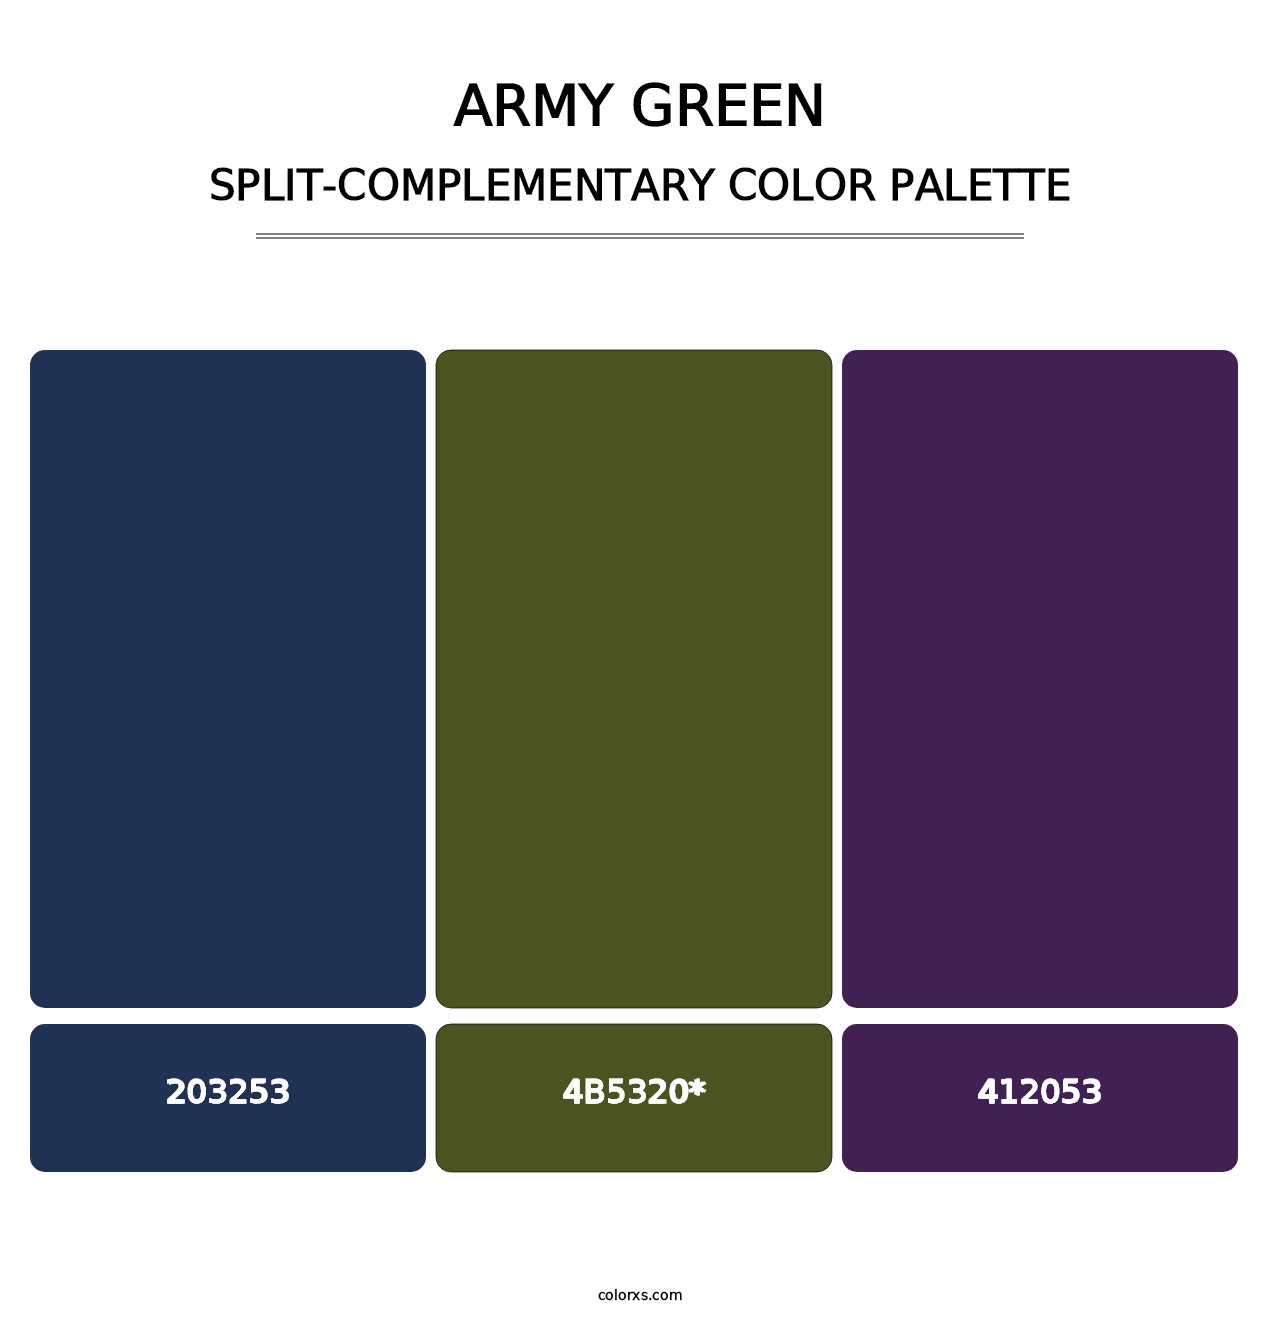 Army Green - Split-Complementary Color Palette